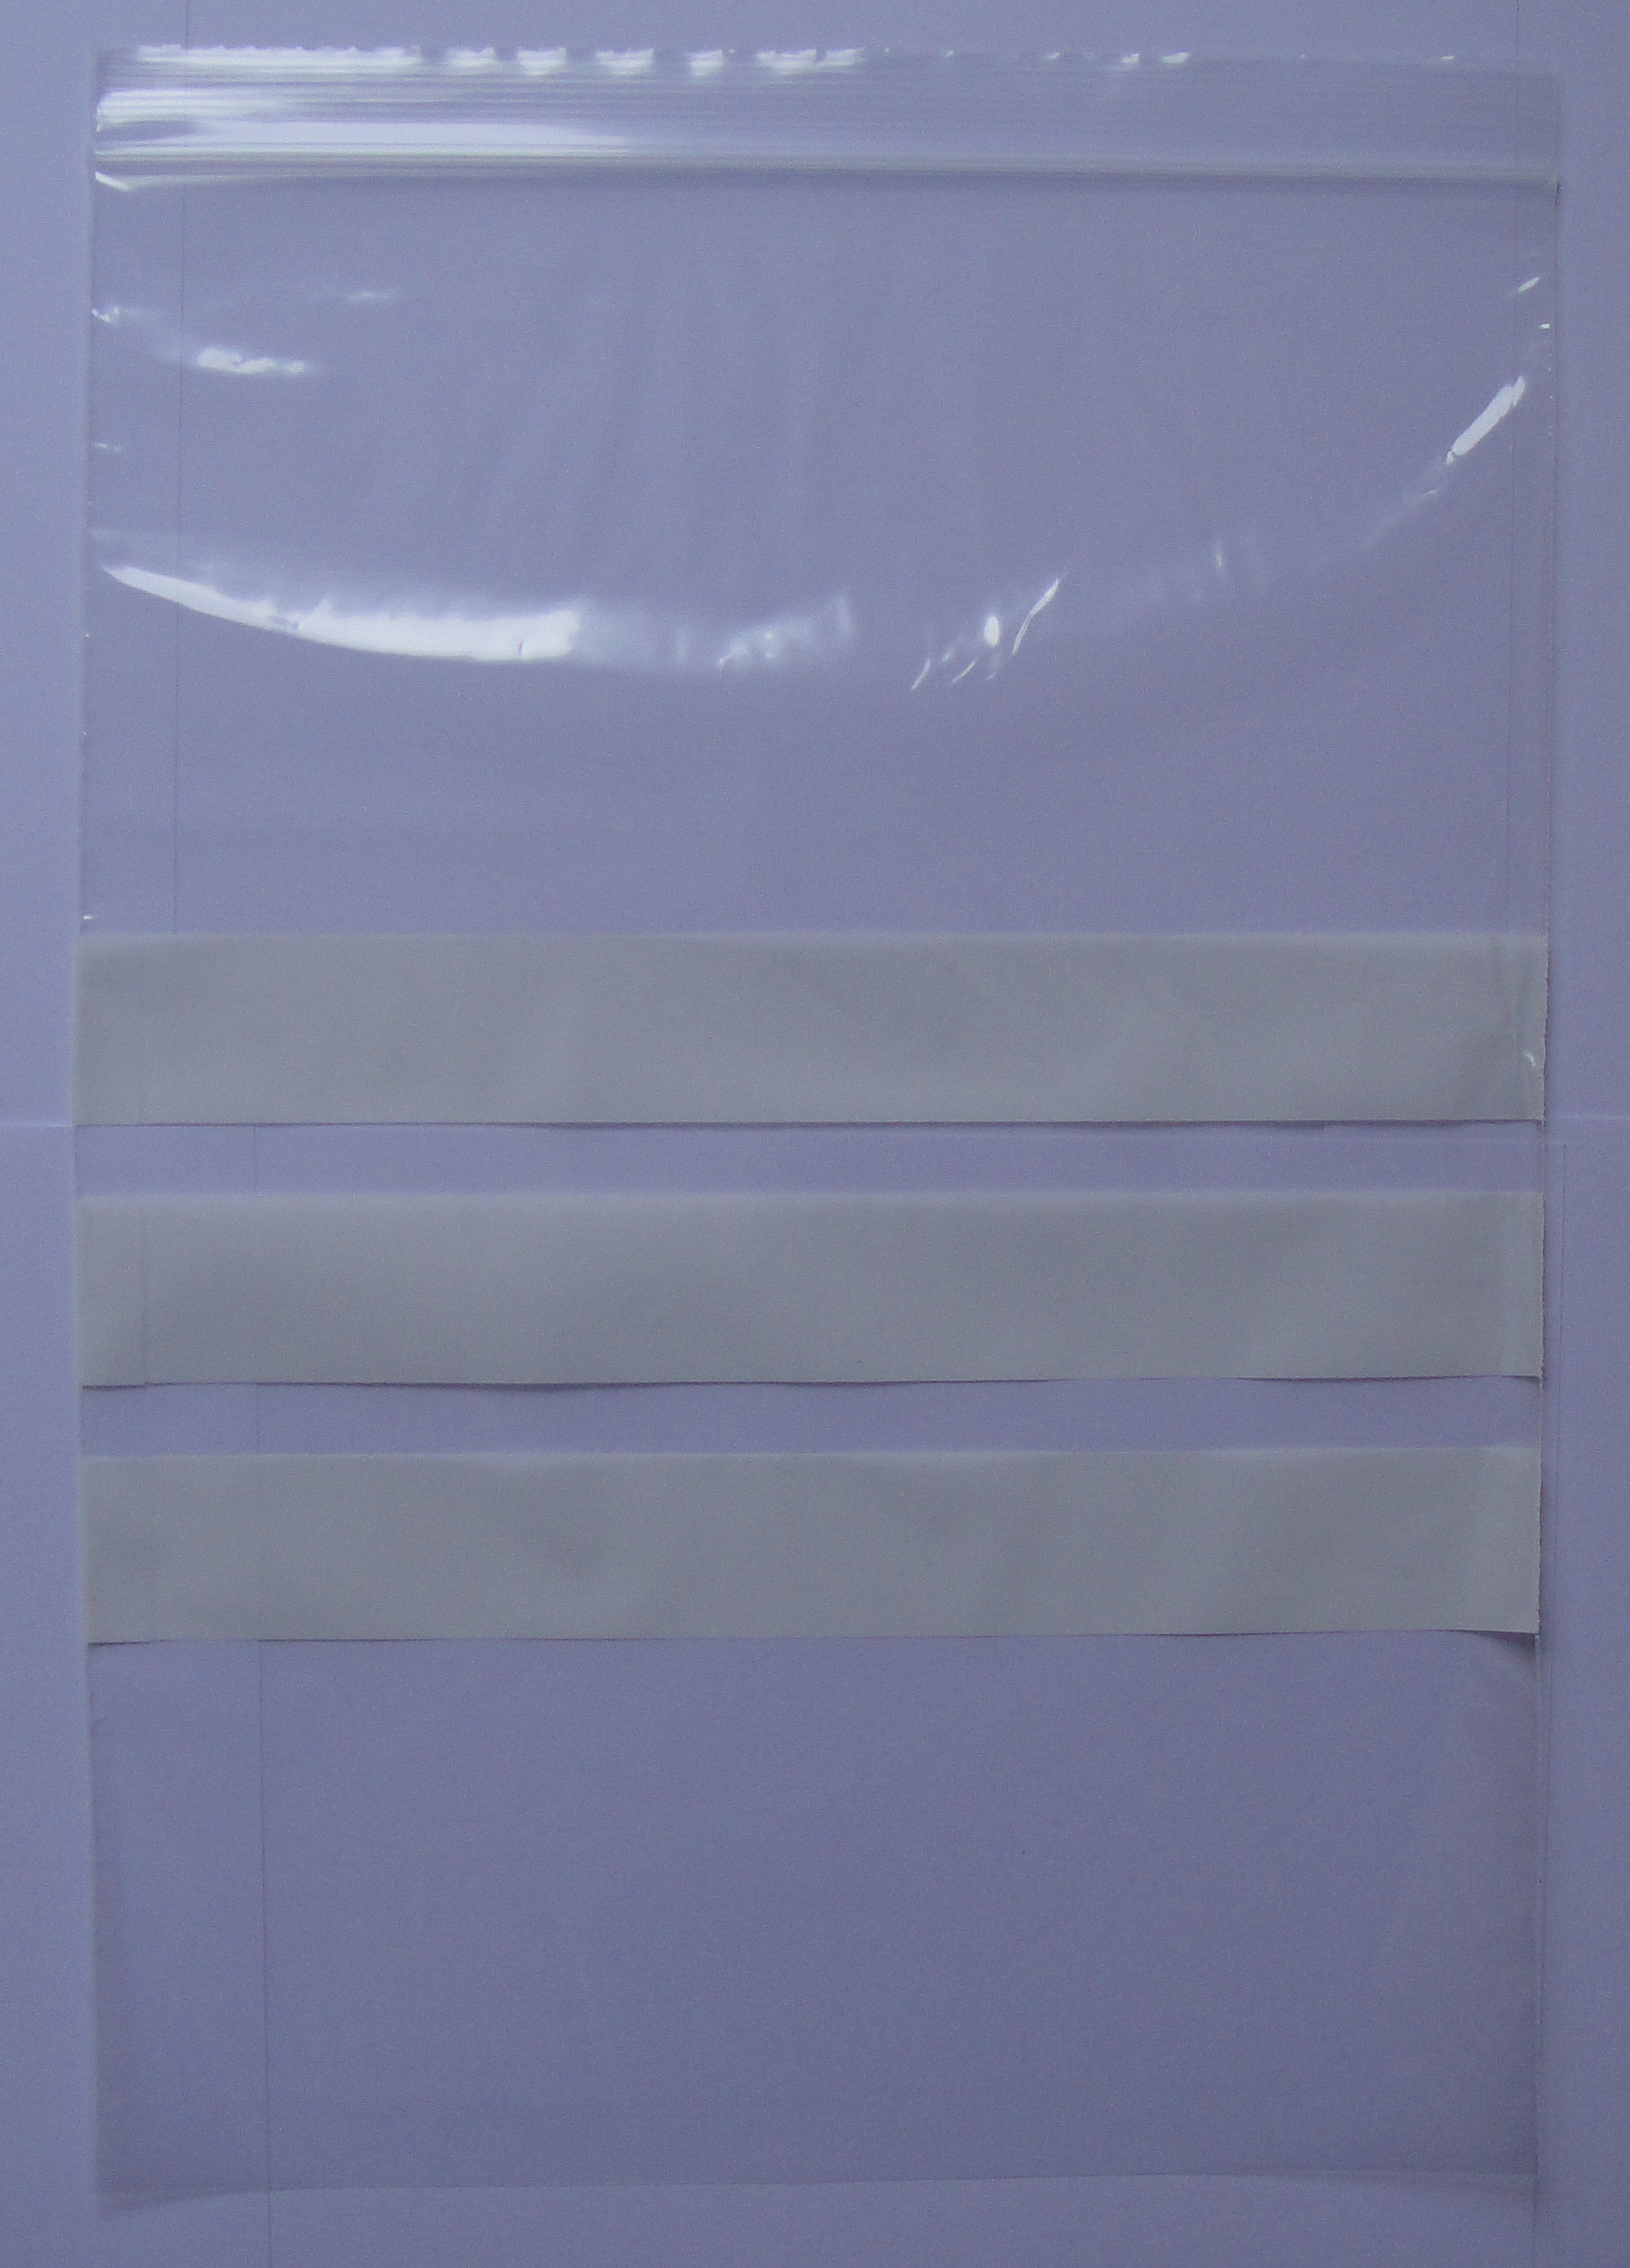 3 x 3.25" 76 x 83mm All Available For Quick Dispatch Grip Seal Bags 